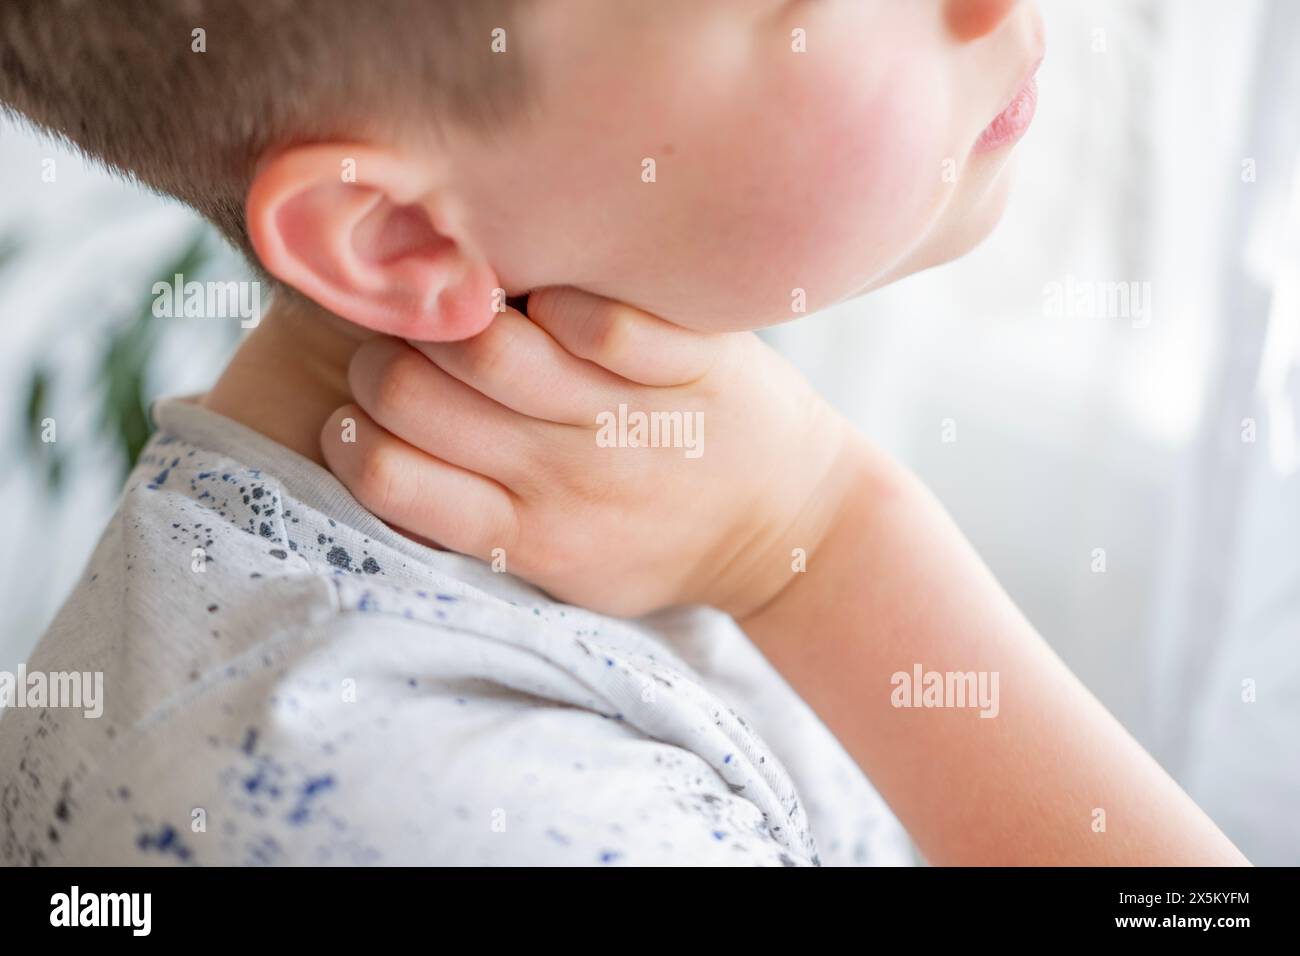 close-up neck, caucasian child patient holding affected area, experiencing throat pain, various causes, medical attention and treatment for condition, Stock Photo